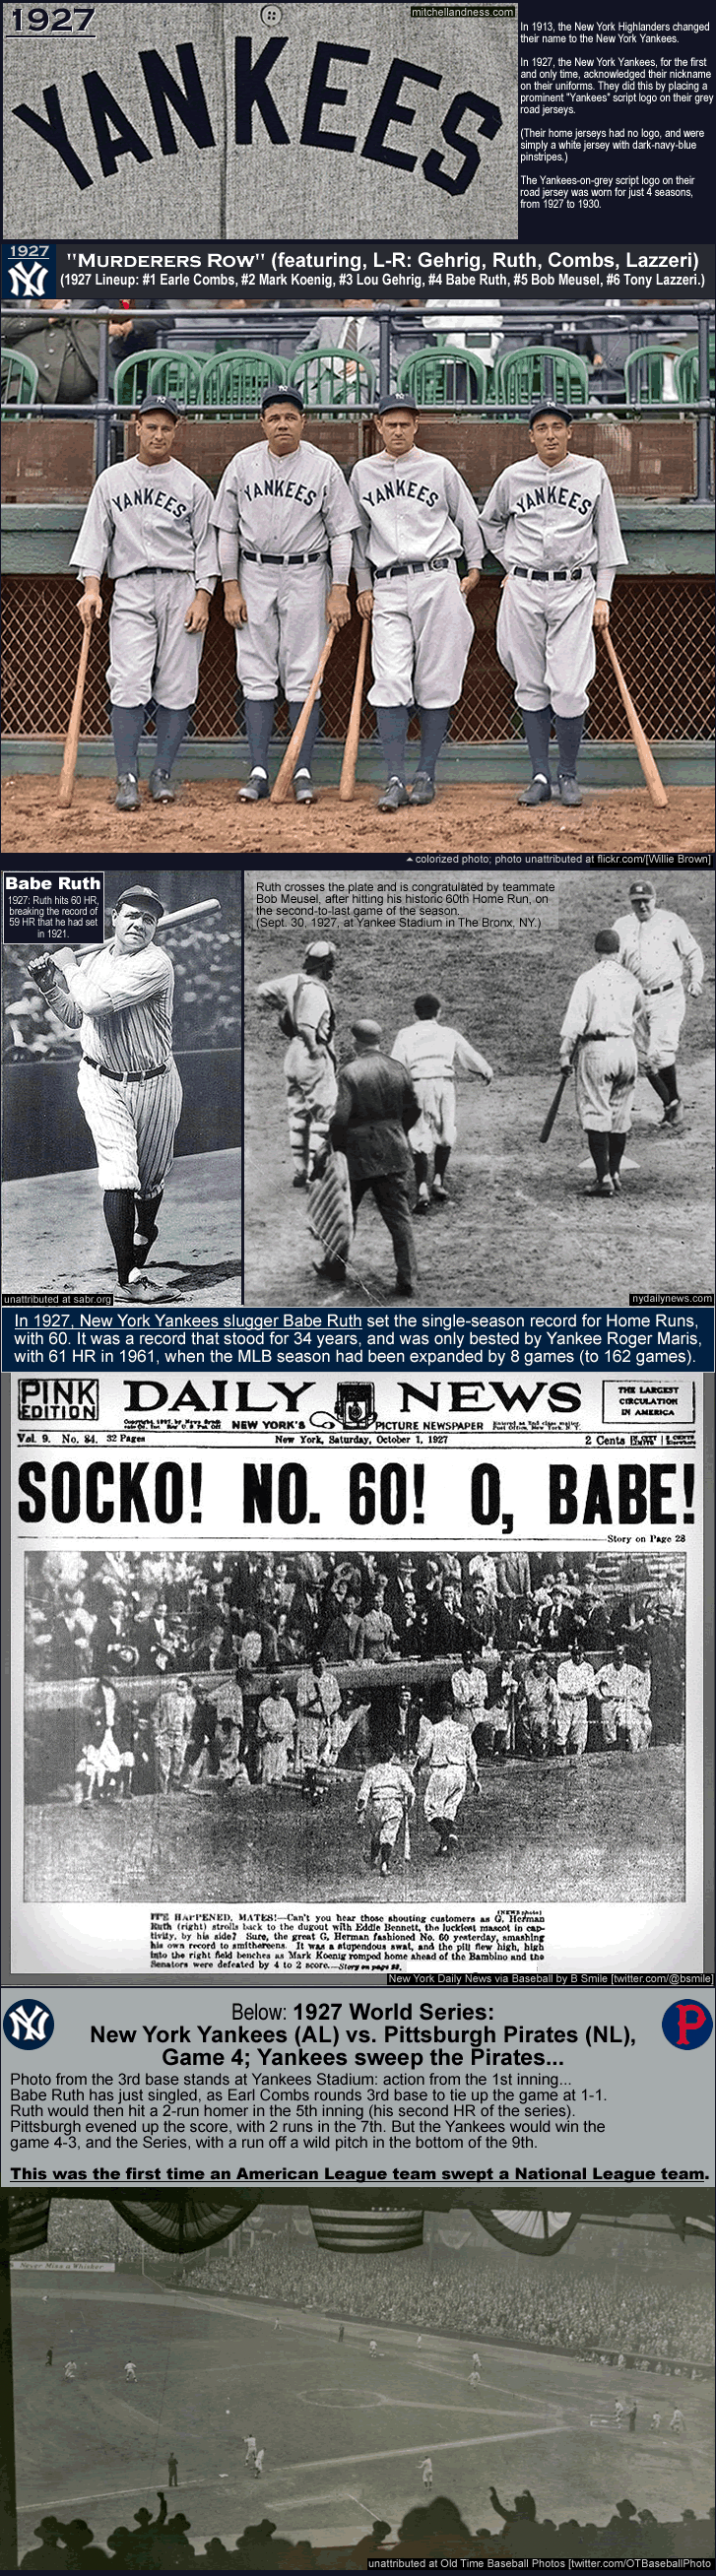 1927_ny-yankees_ruth_gehrig_combs_lazzeri_ruth-hits-60-hr_yankees-sweep-pirates-in-1927-world-series_f_.gif